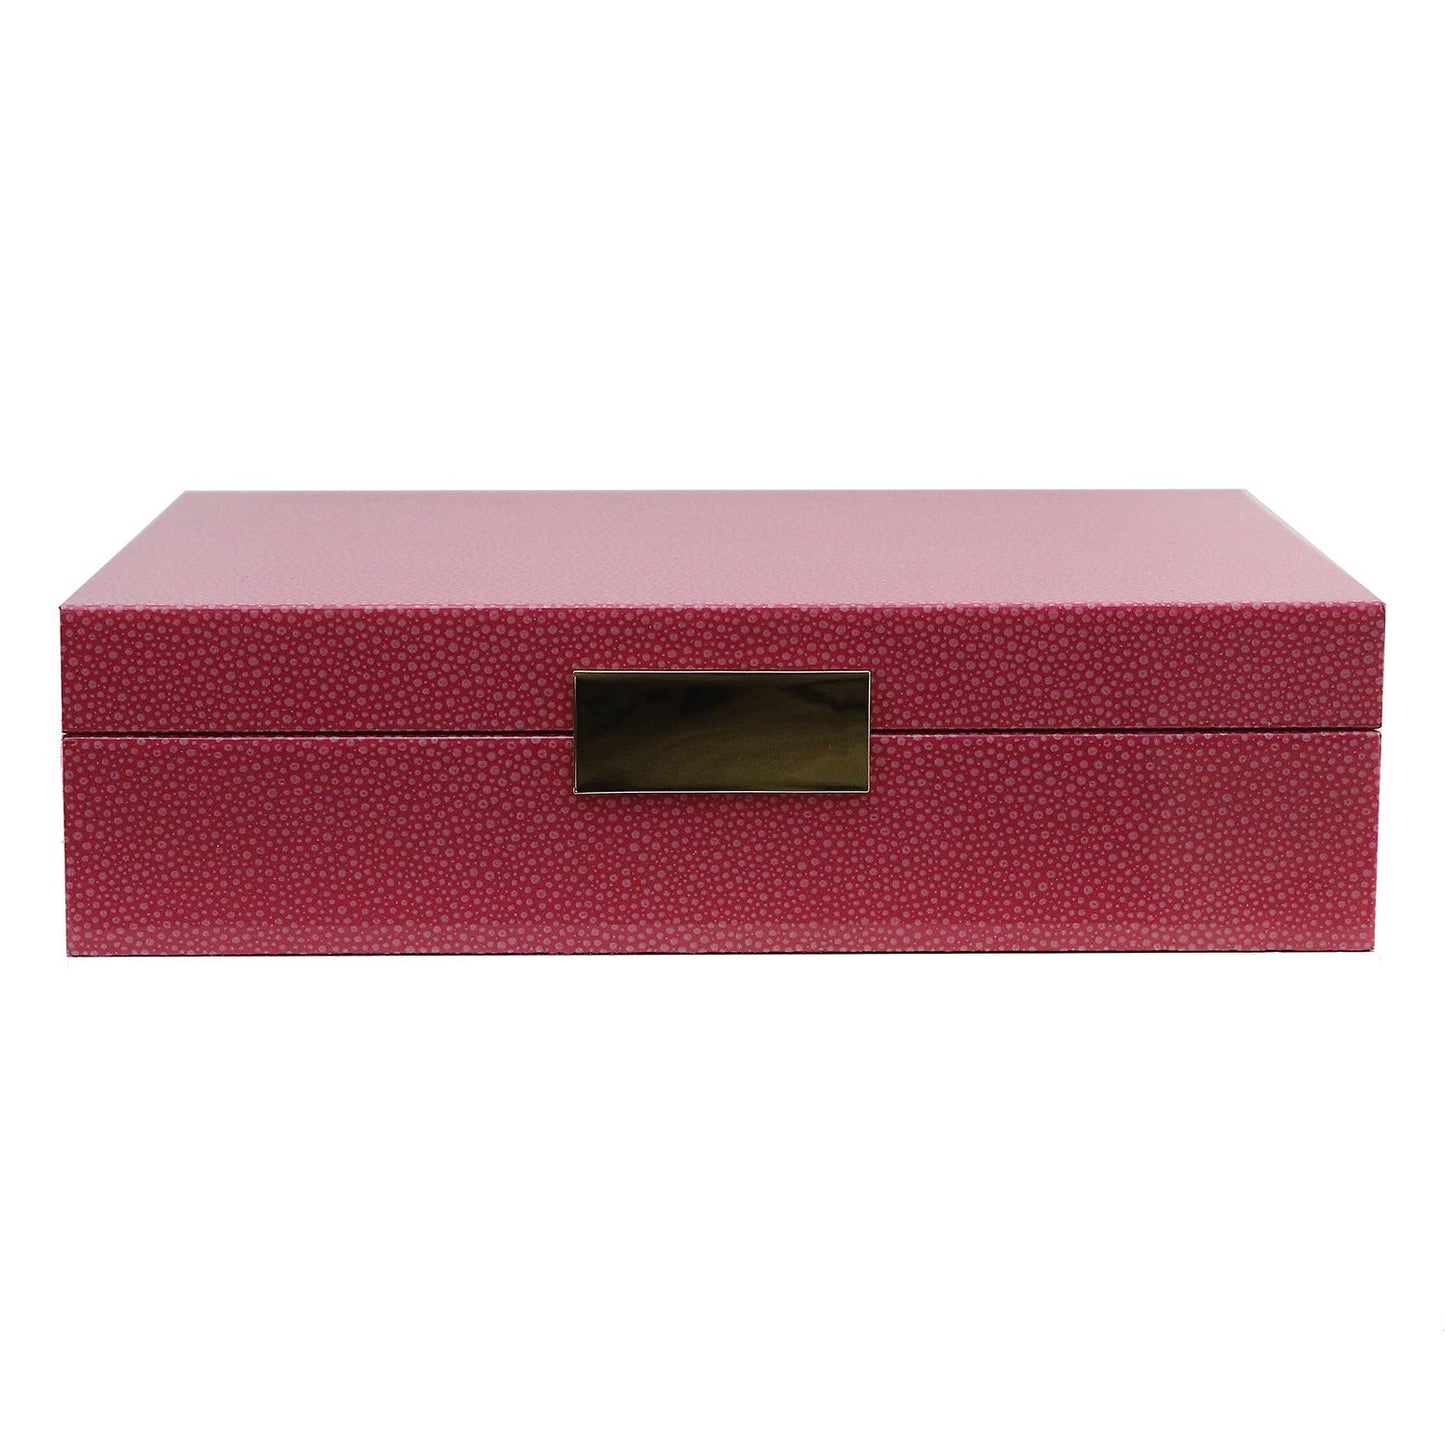 Large Pink Shagreen Jewellery Box with Gold